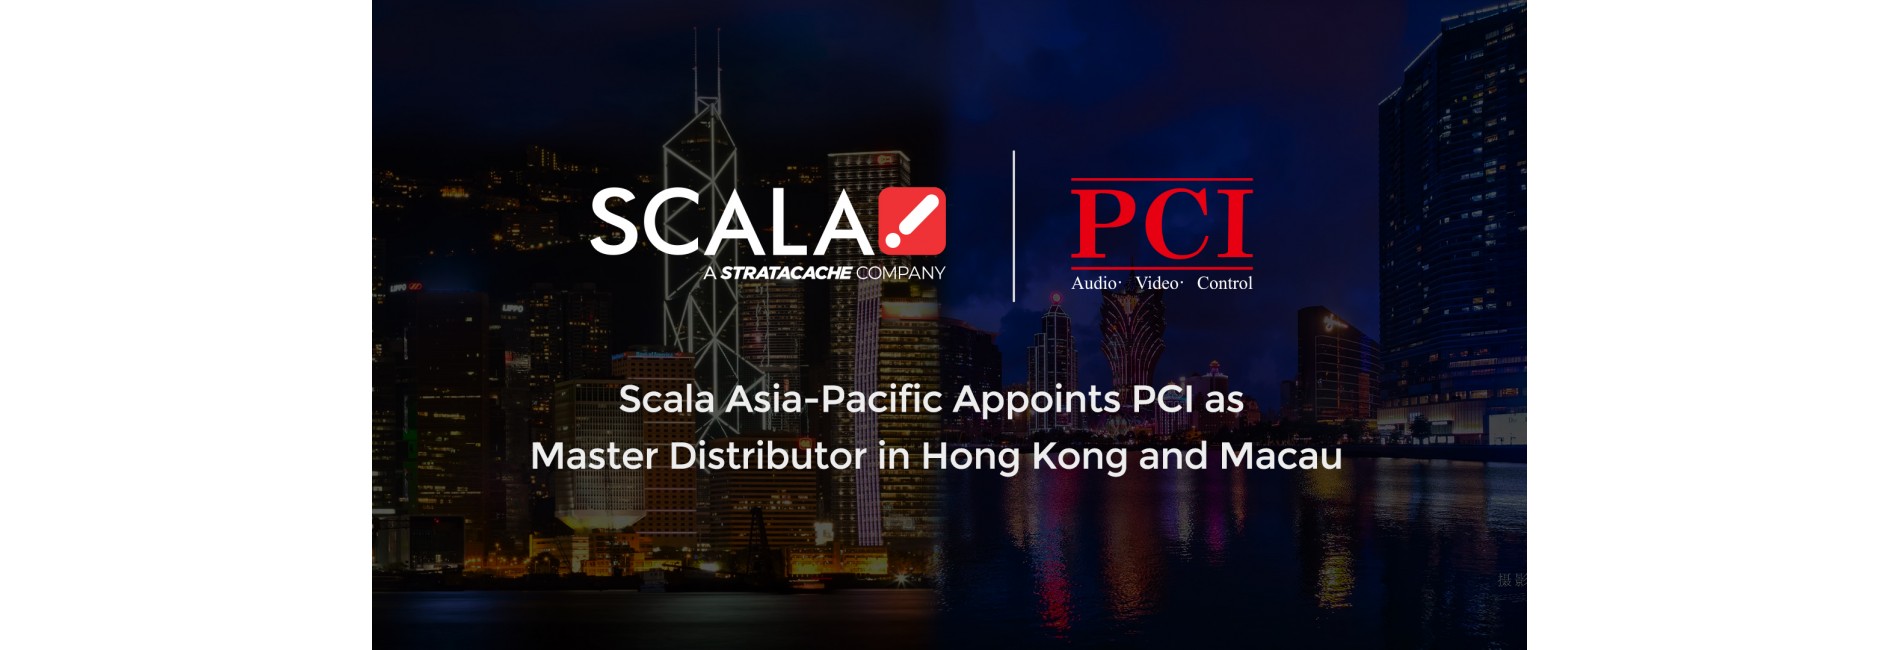 Scala Asia-Pacific appoints PCI as Master Distributor